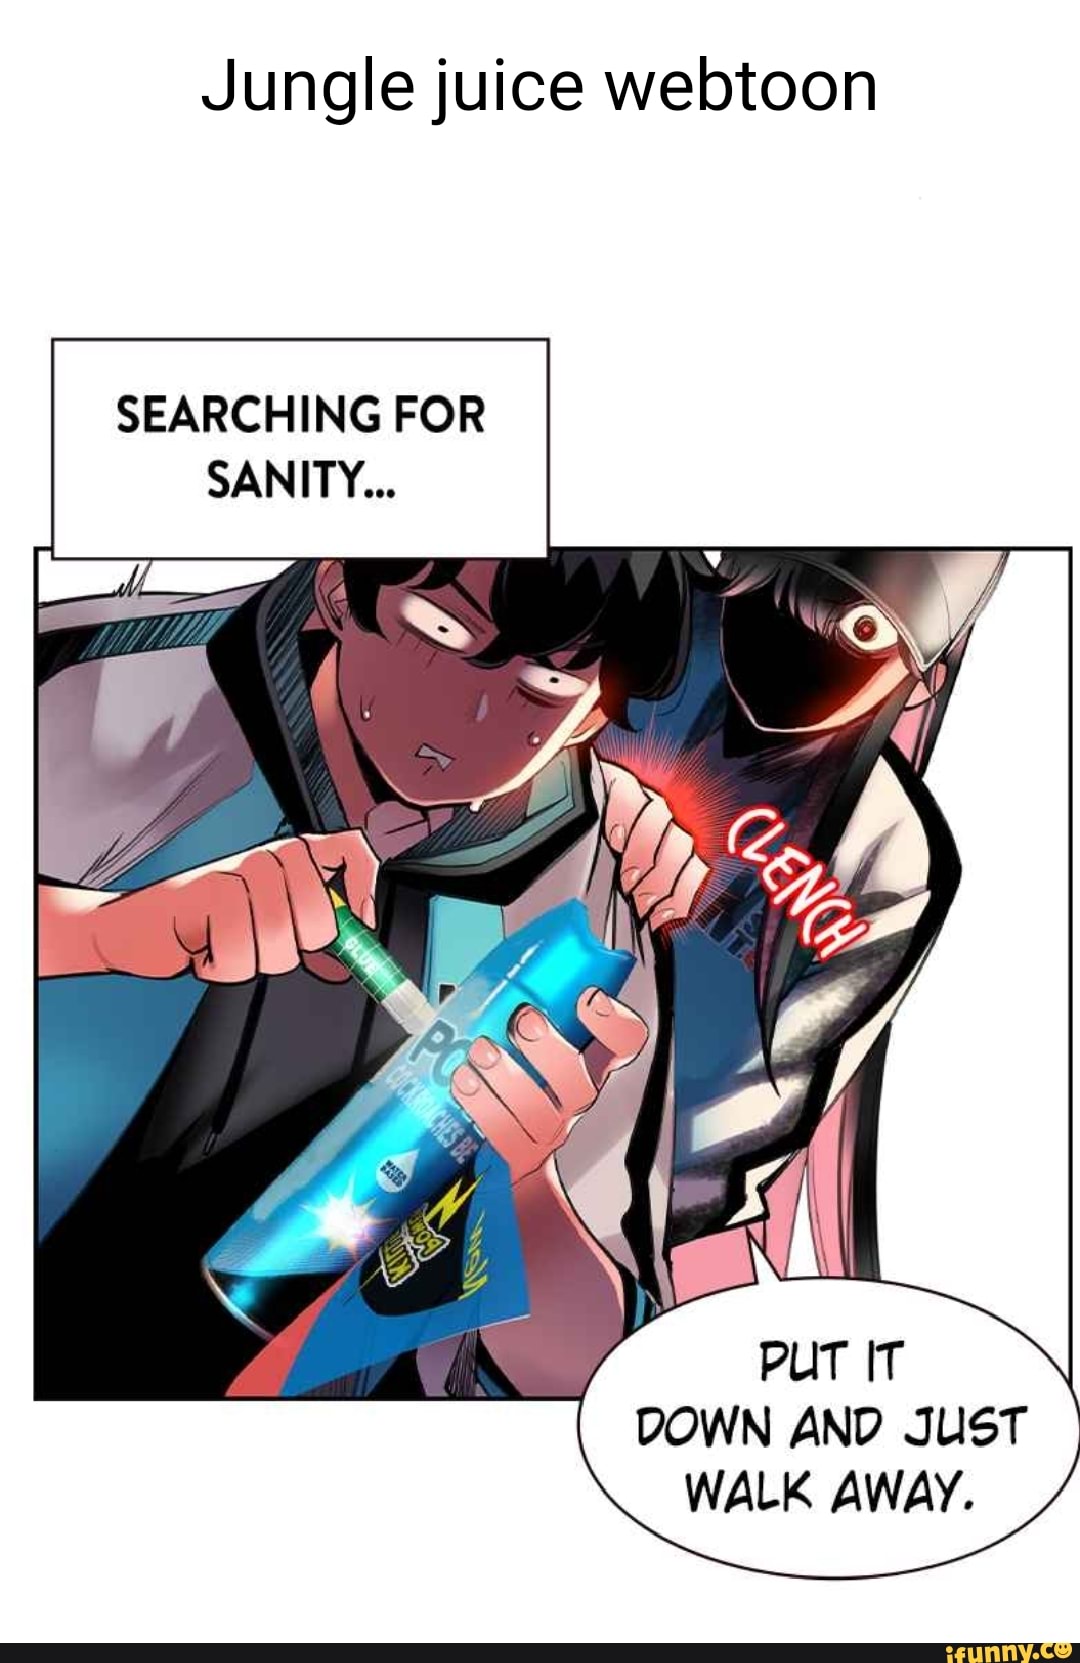 Jungle juice webtoon SEARCHING FOR SANITY... PUT IT DOWN AND JUST WALK  AWAY. 